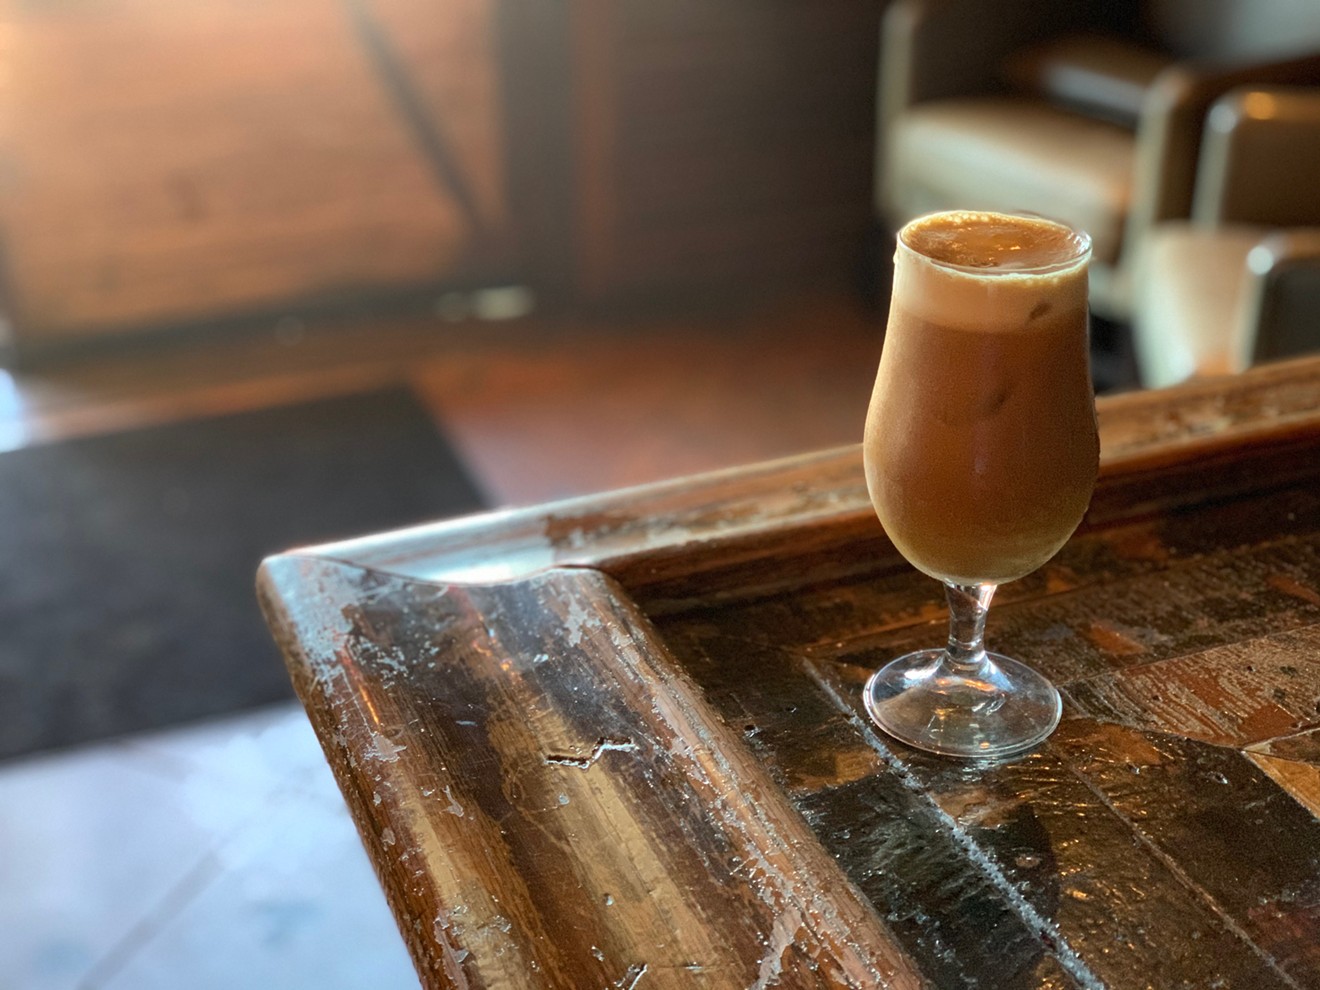 Caffeinated cocktails are eye-opening.